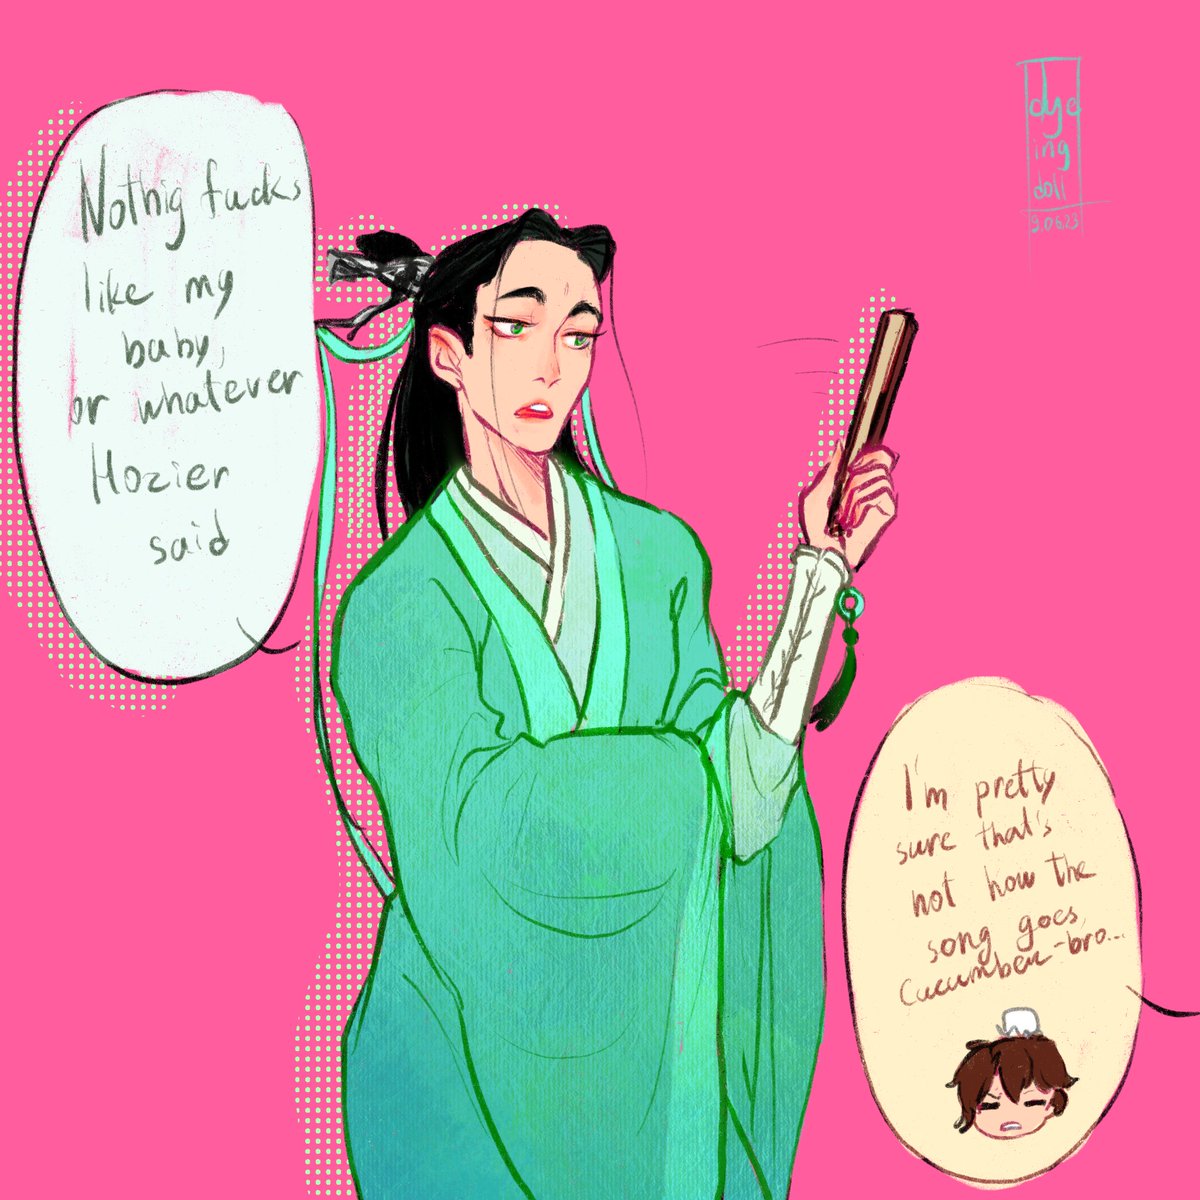 They were talking about songs, probably? Idk, it just all went downhill at some point... 
#ScumVillainsSelfSavingSystem